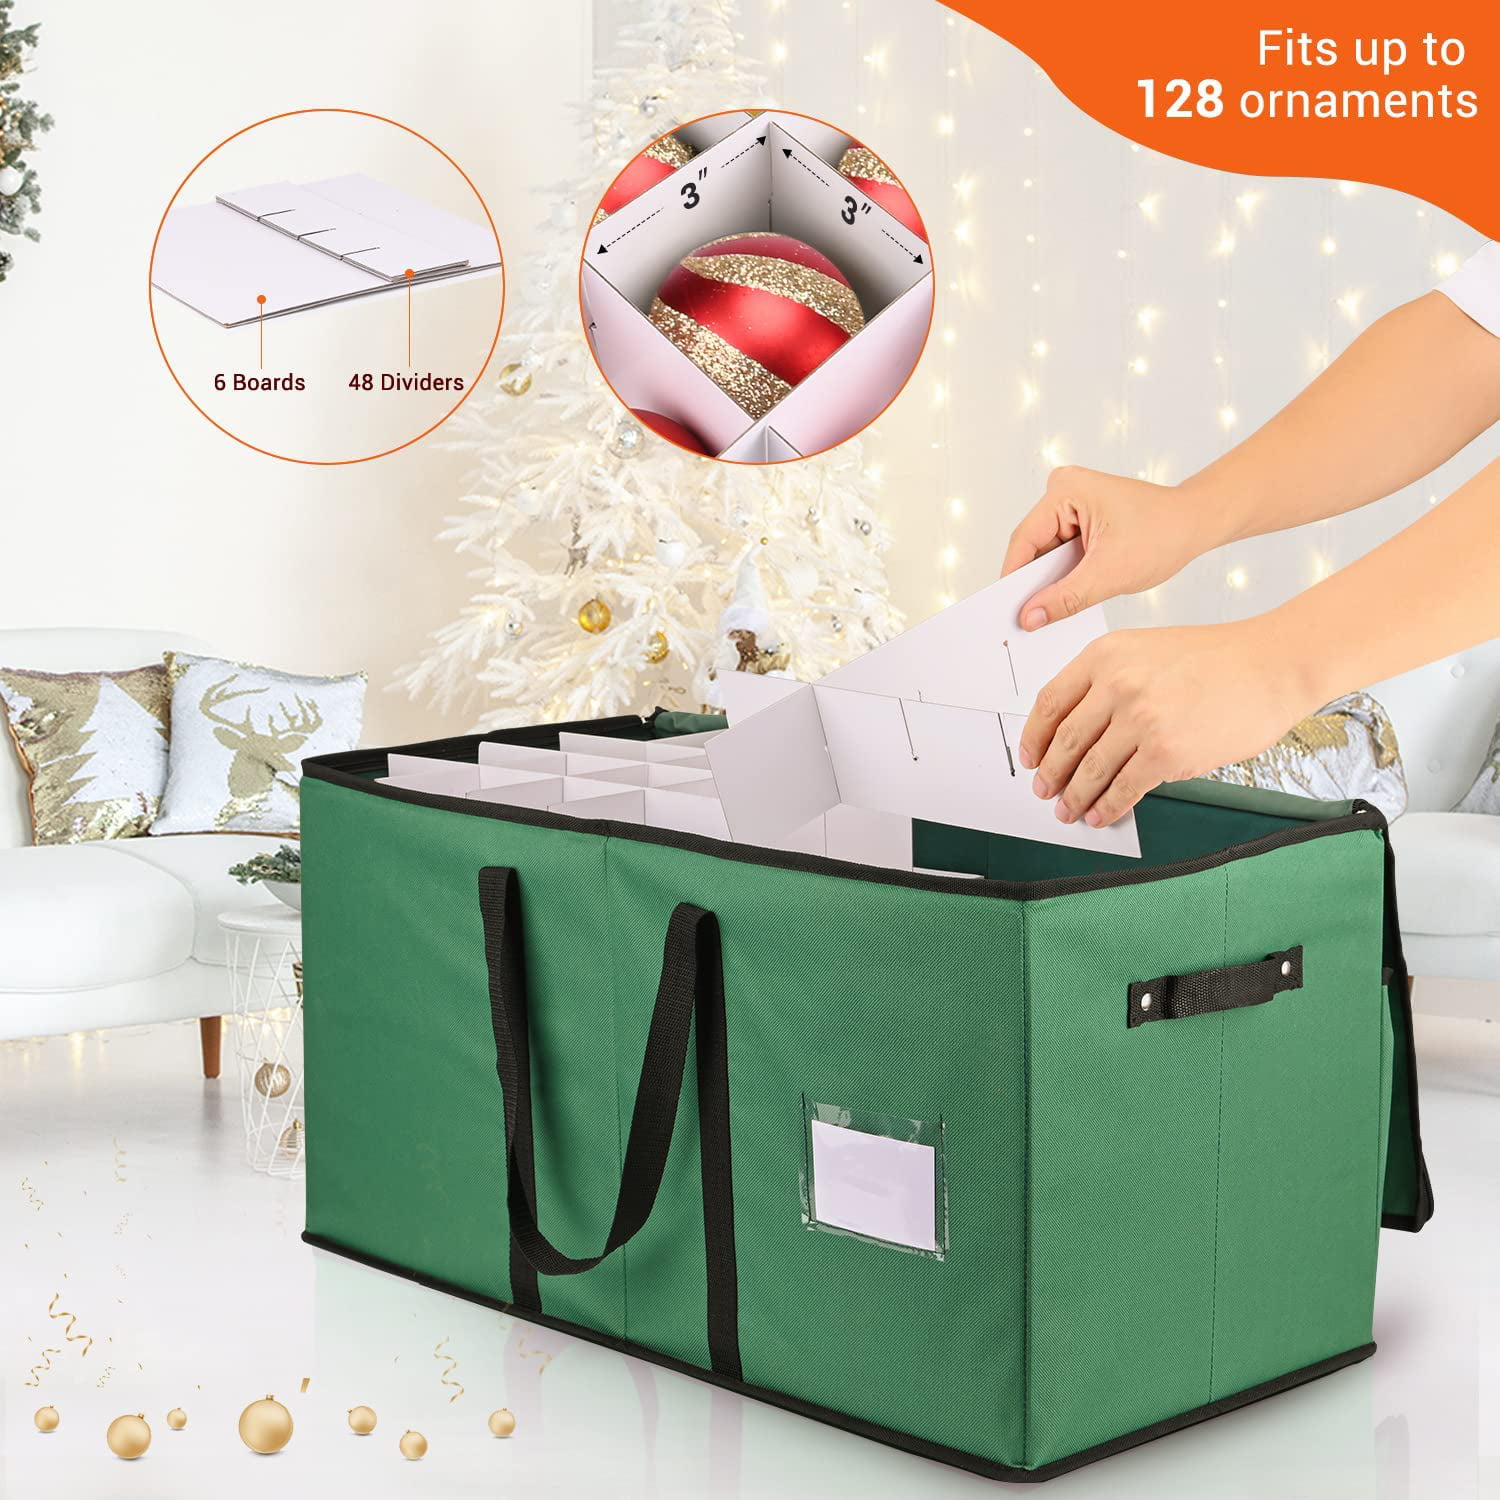 Kesfitt Christmas Ornament Storage Box,Christmas Storage Container With  Adjustable Dividers Fits 128 Holiday Ornaments Decorations 3-Inch,Large  Xmas